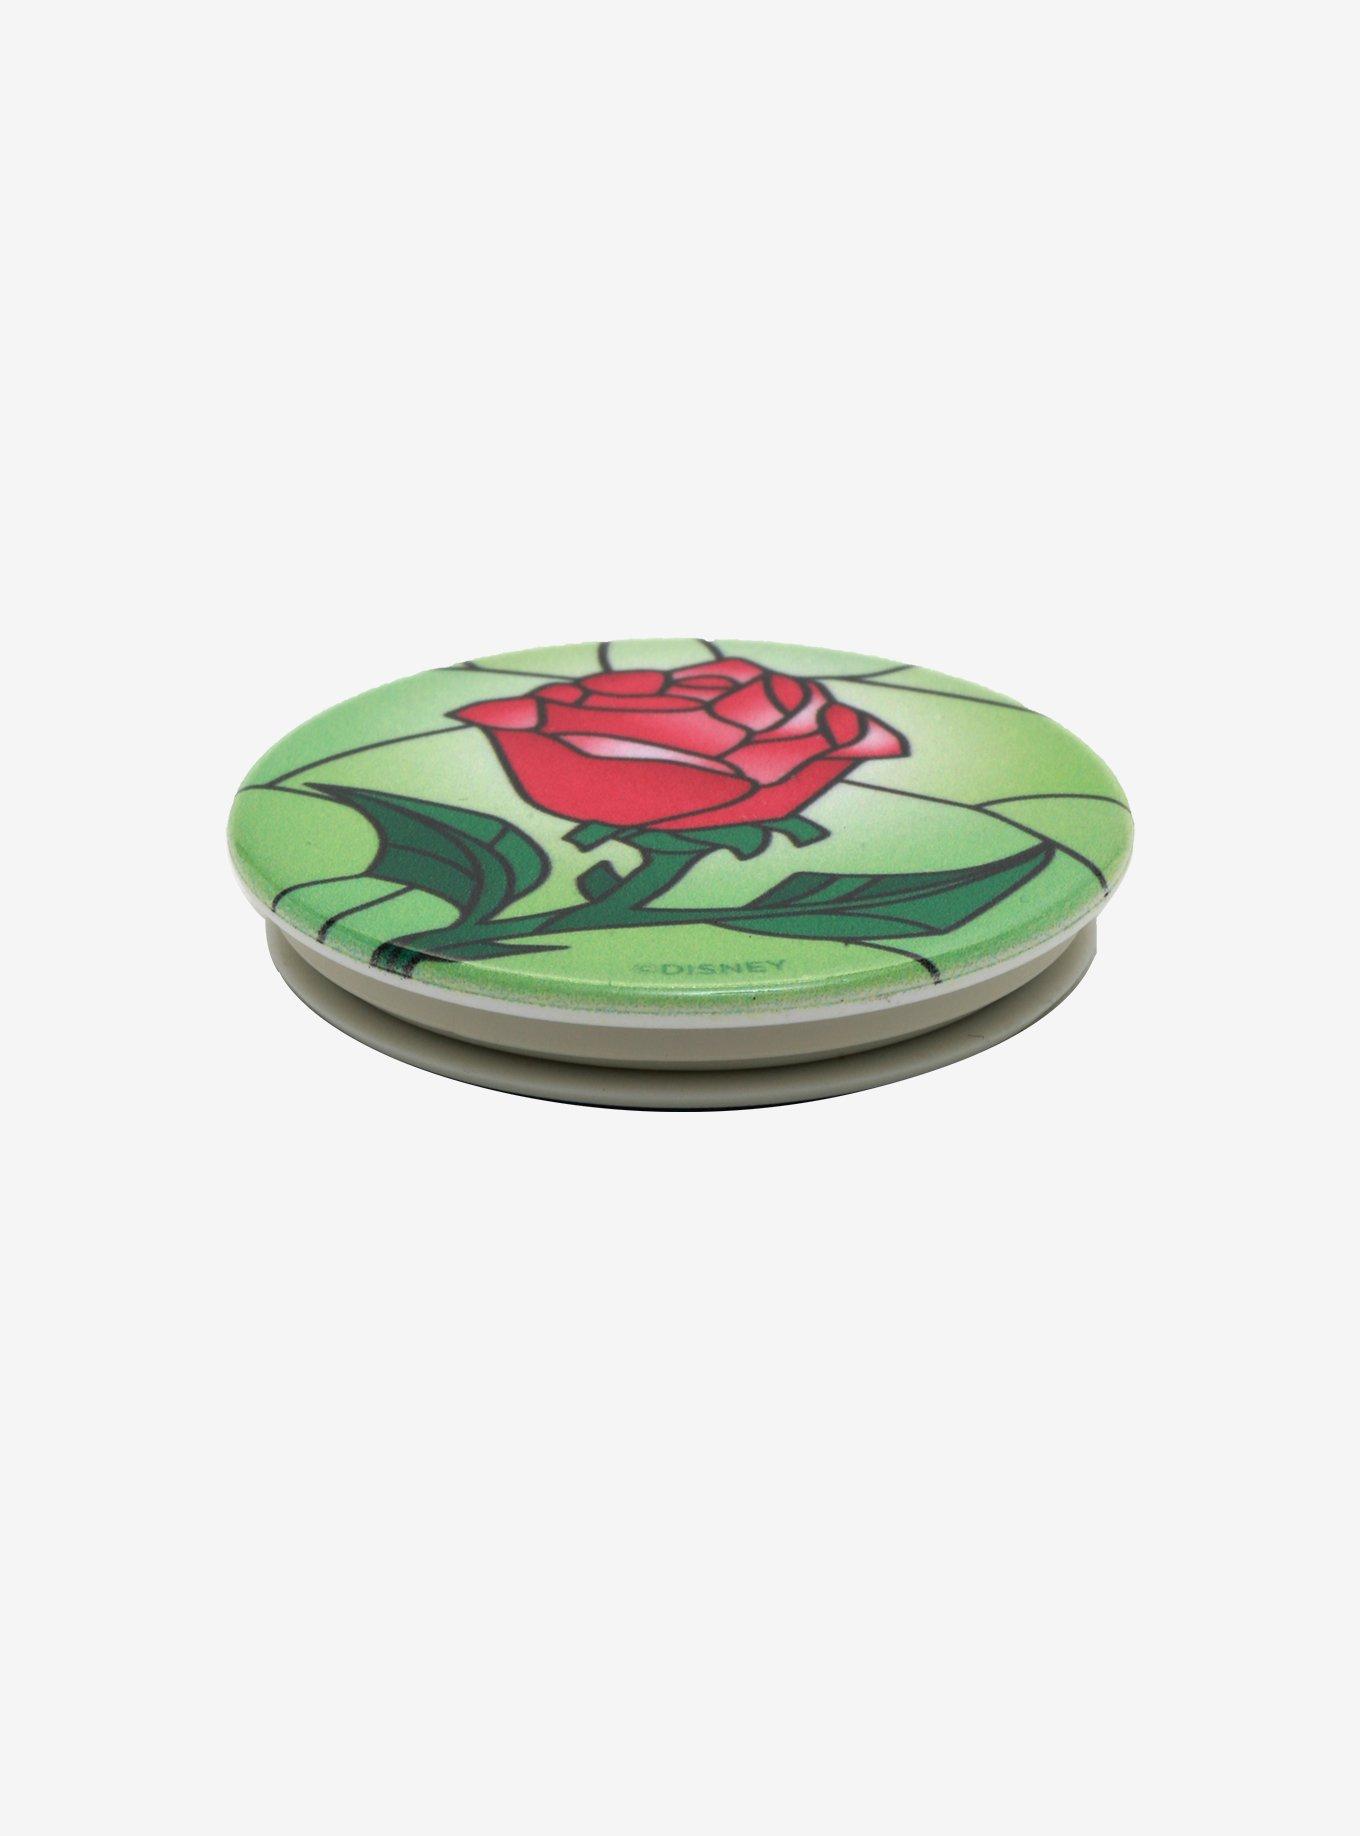 PopSockets Disney Beauty And The Beast Enchanted Rose Phone Grip & Stand, , alternate